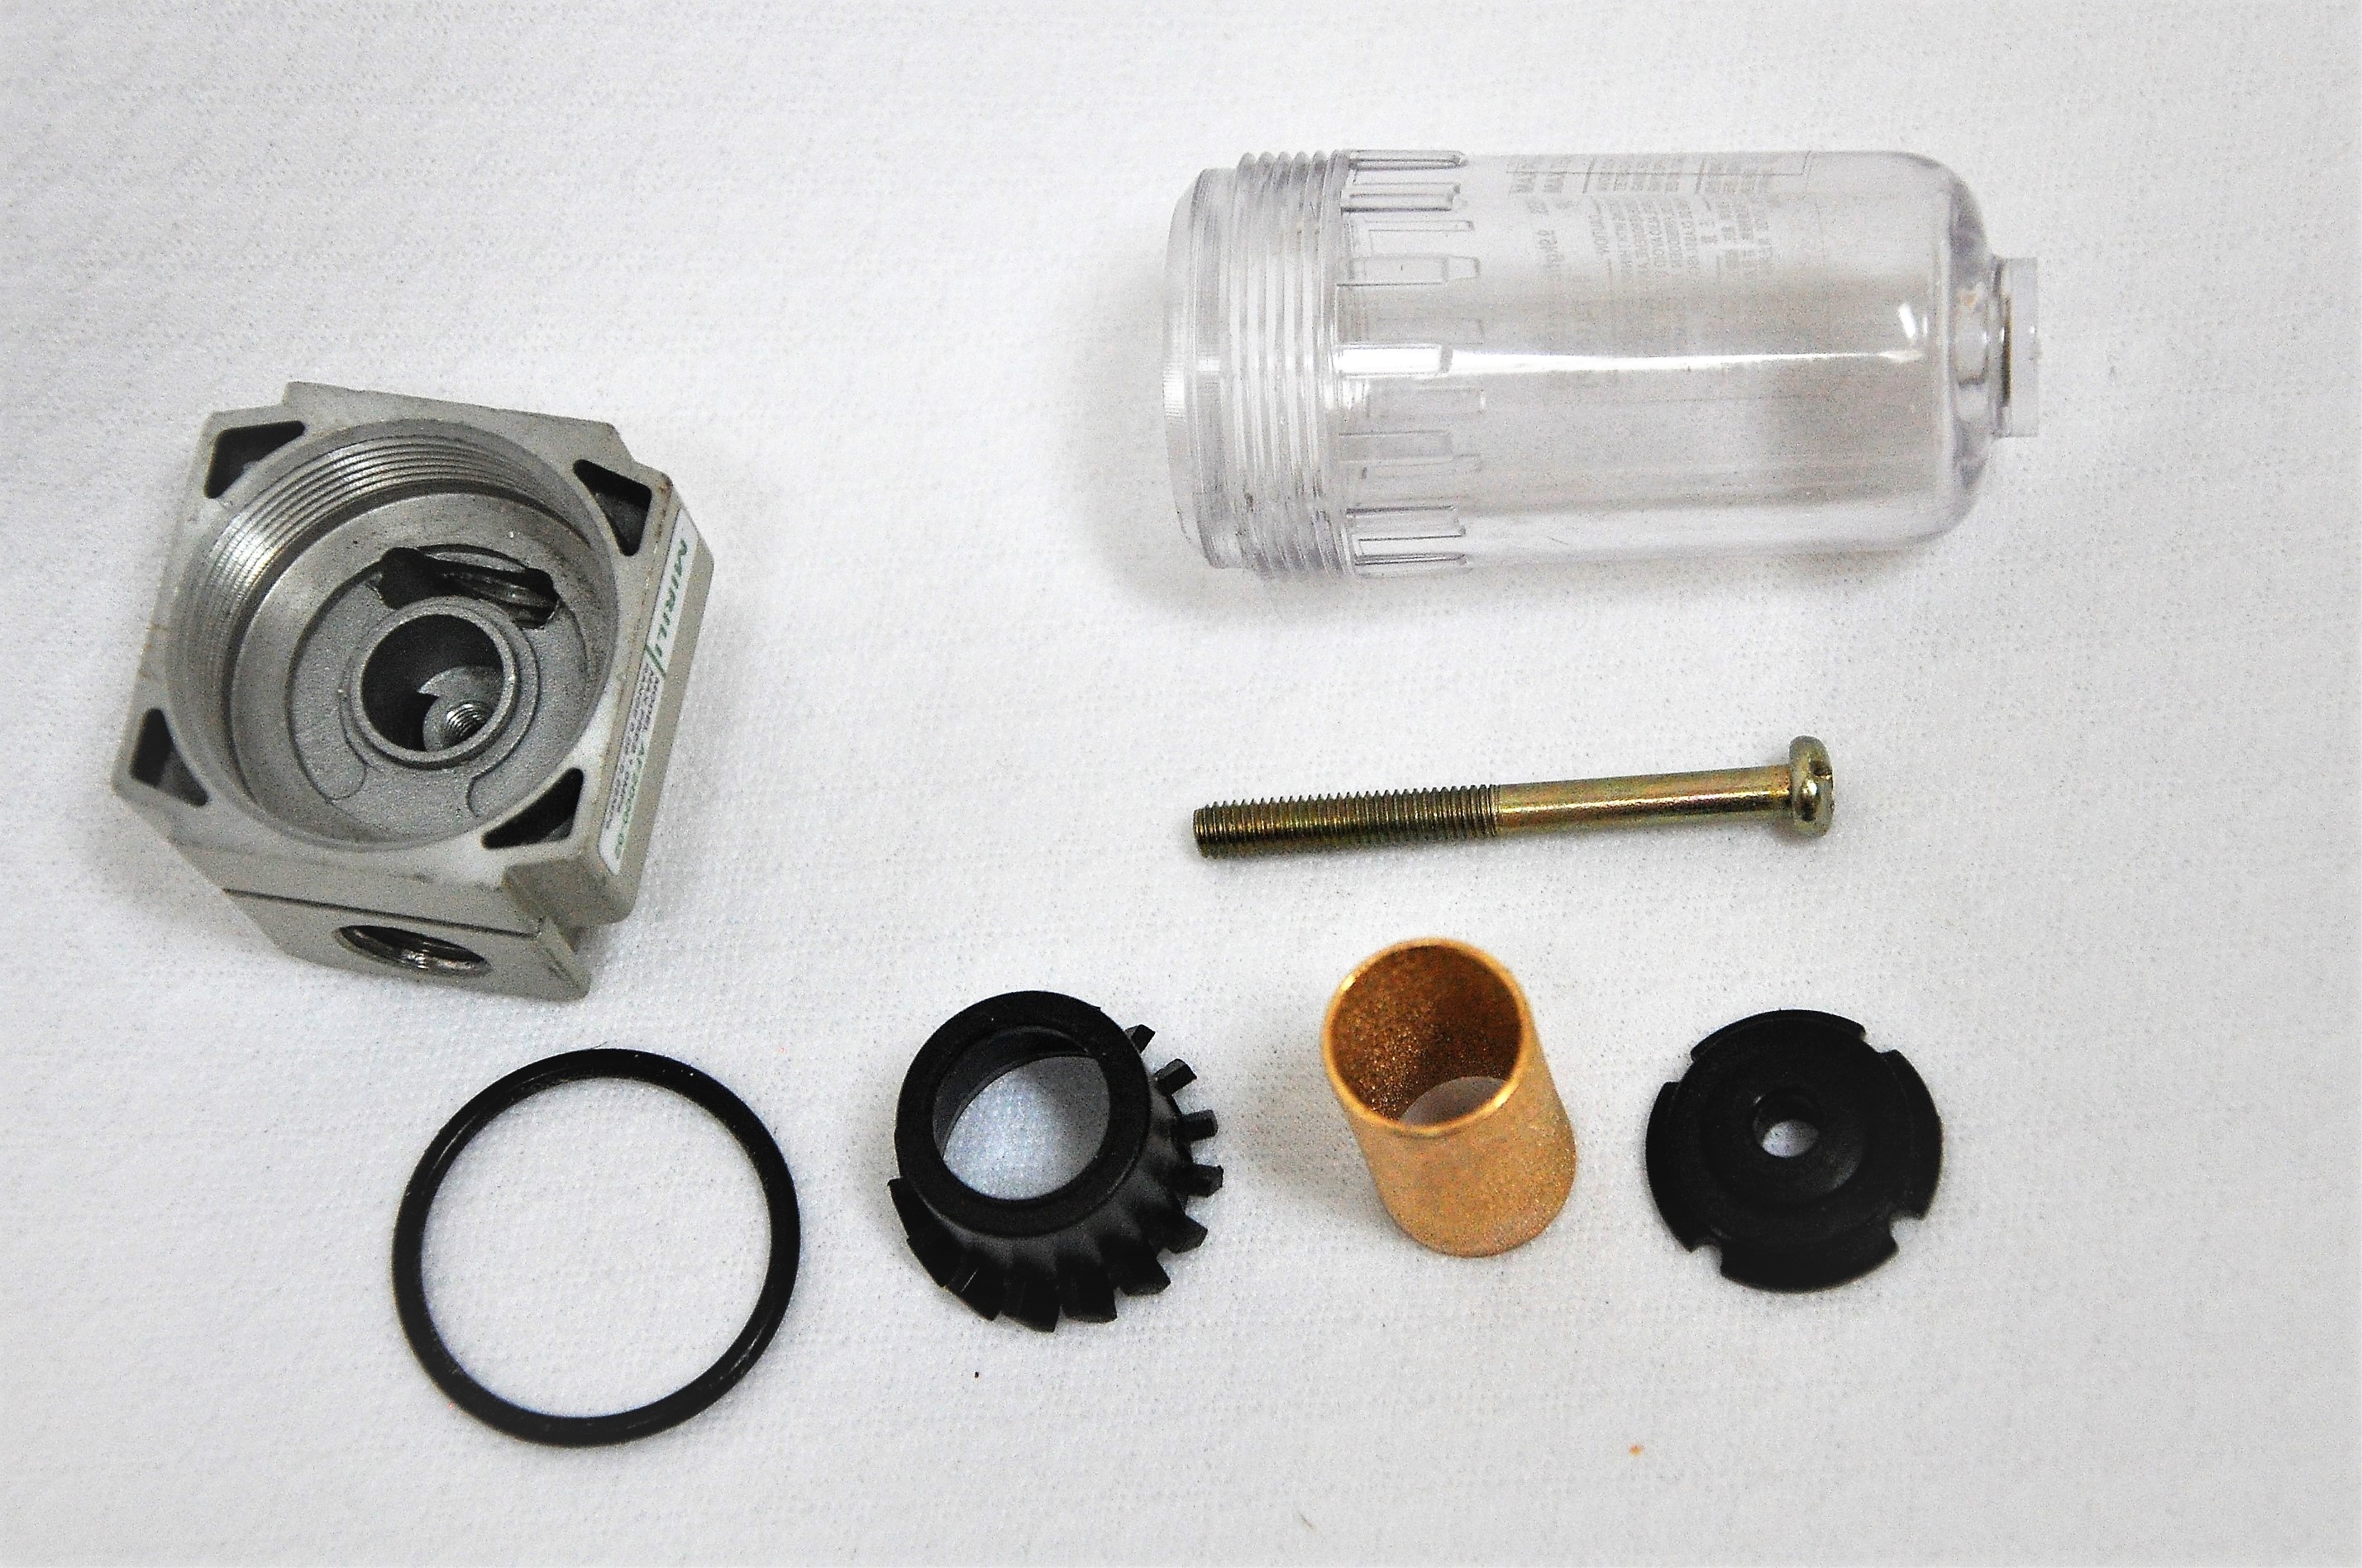 Mini-Filter Dust Filter Assembly for Oilless Oilfree Vacuum Pumps 1/4 npt